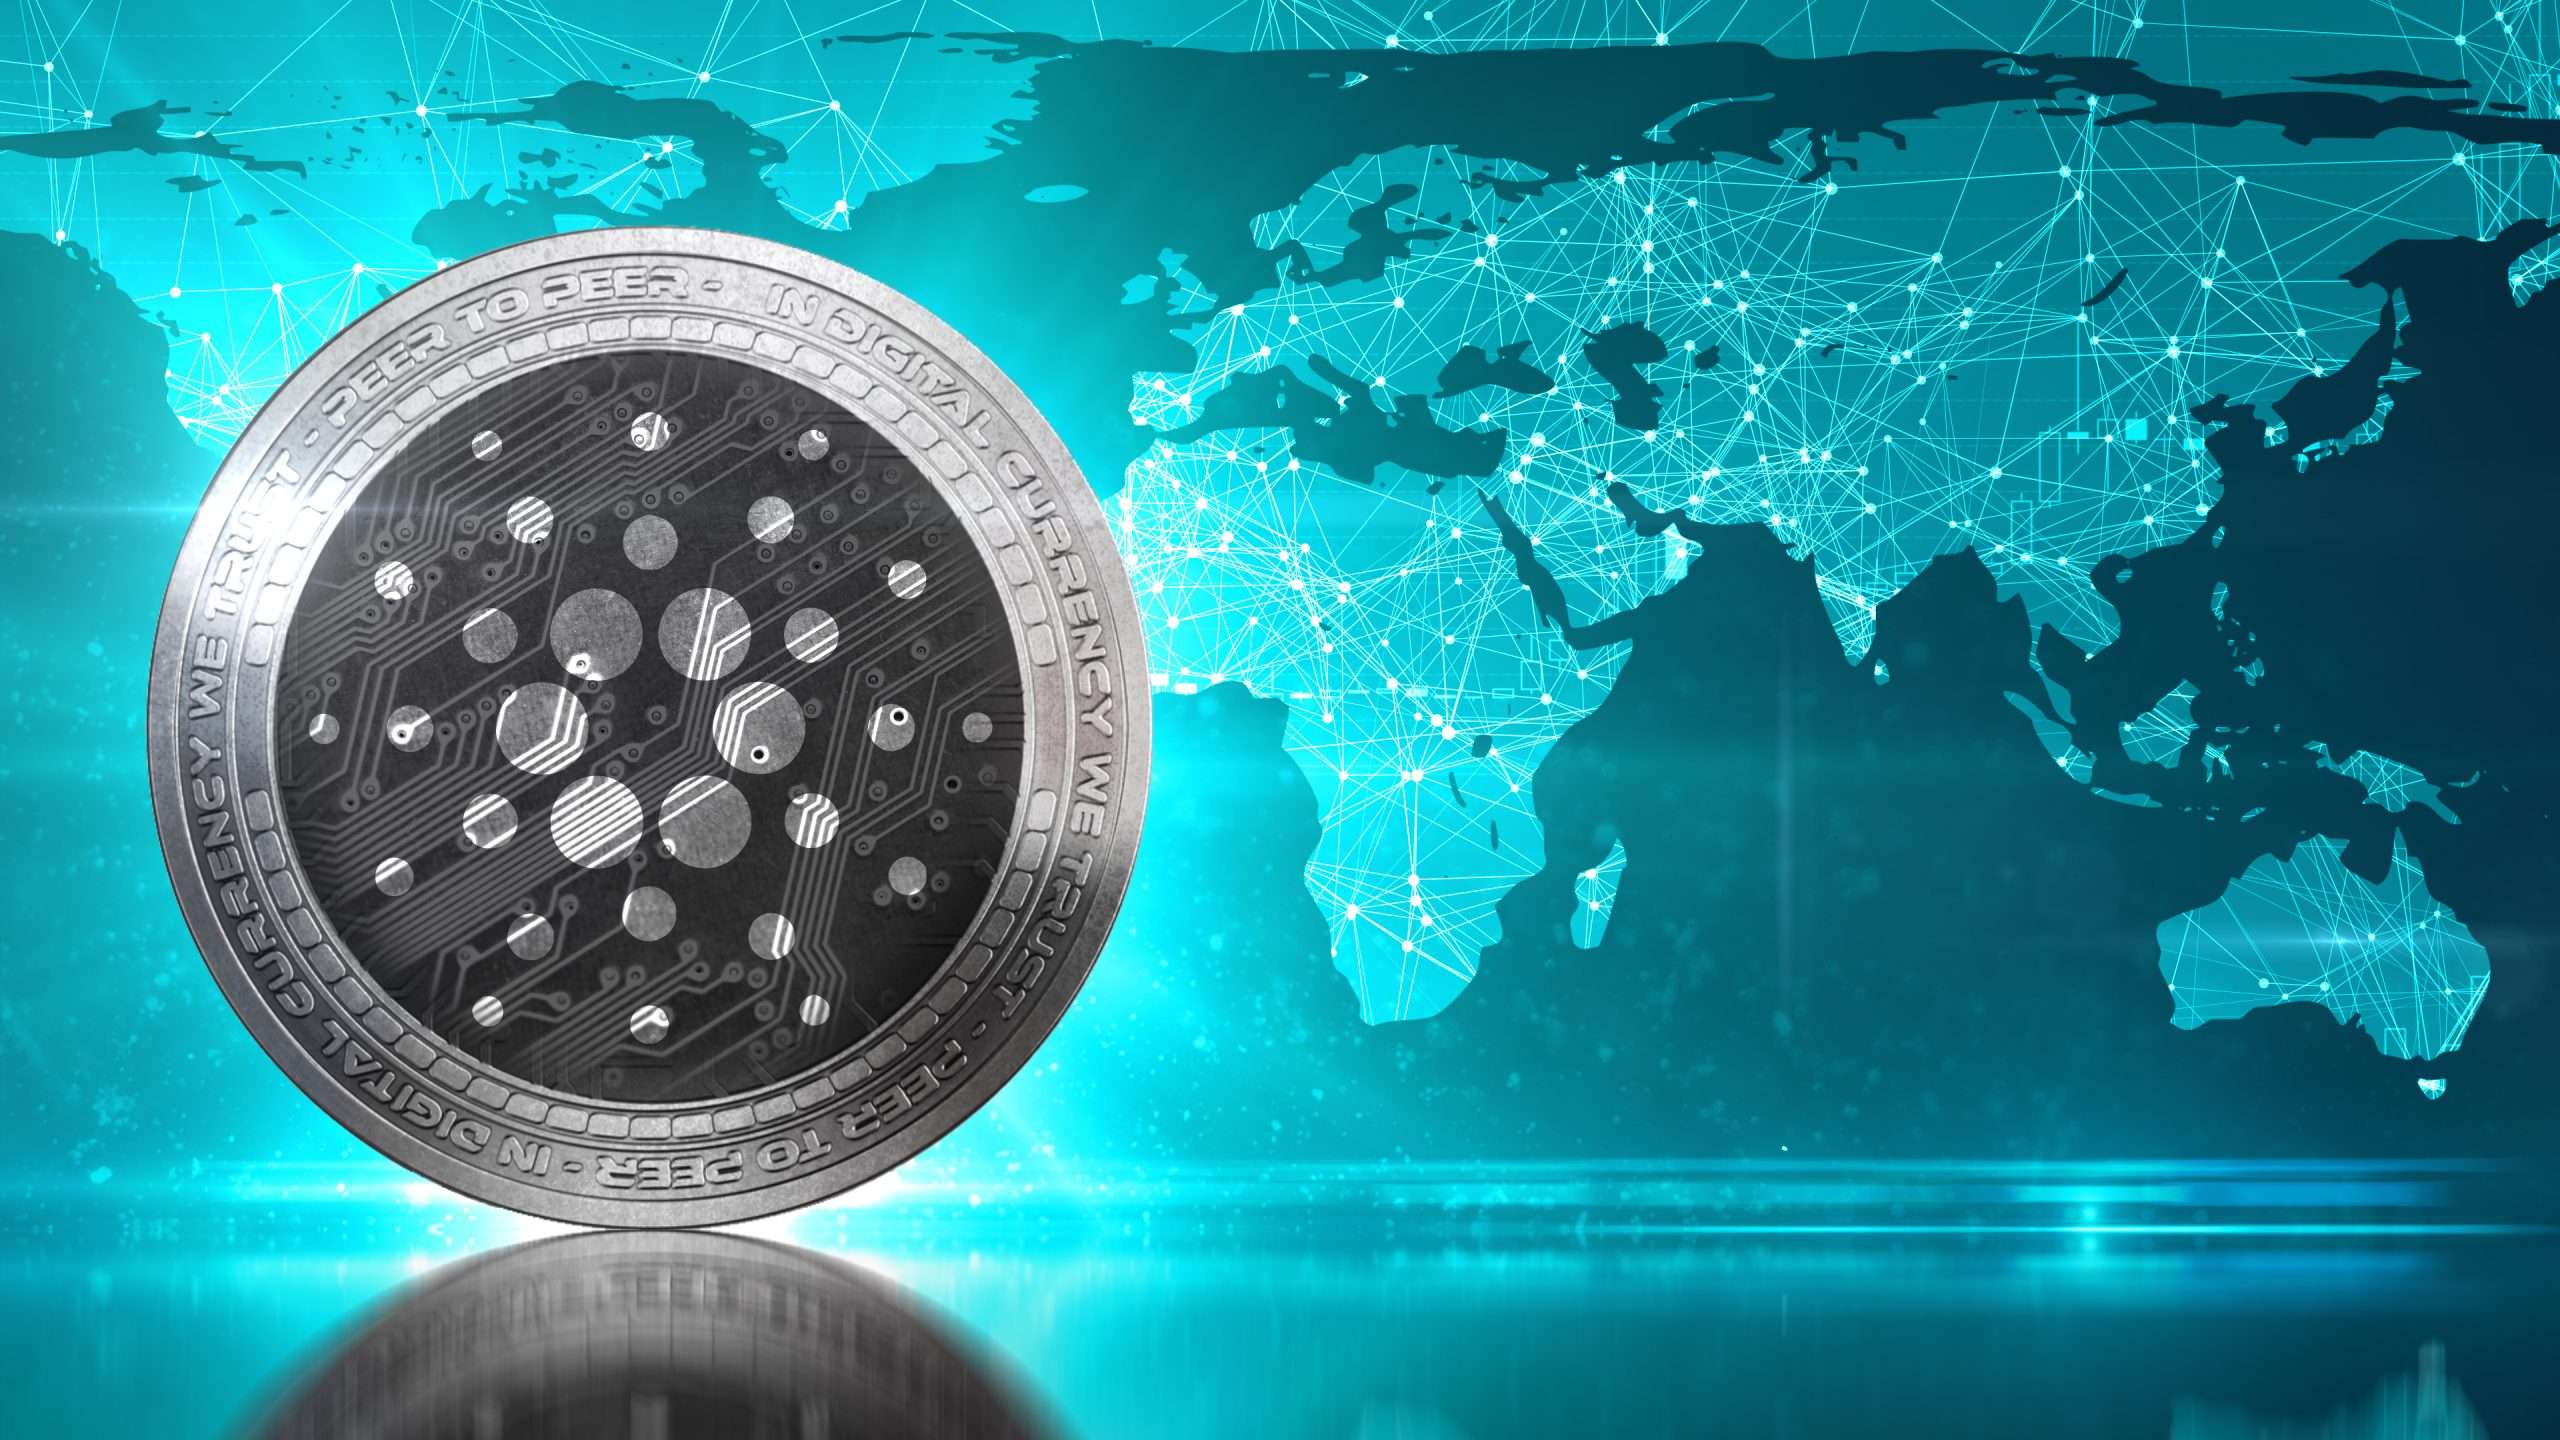 Innovative Cardano Project ‘Âtrium’ Enters Alpha and Will Onboard Millions of Users, Increasing the Network’s Decentralization – Can ADA Price Continue Its Bullish Trend and Rise to $0.30?